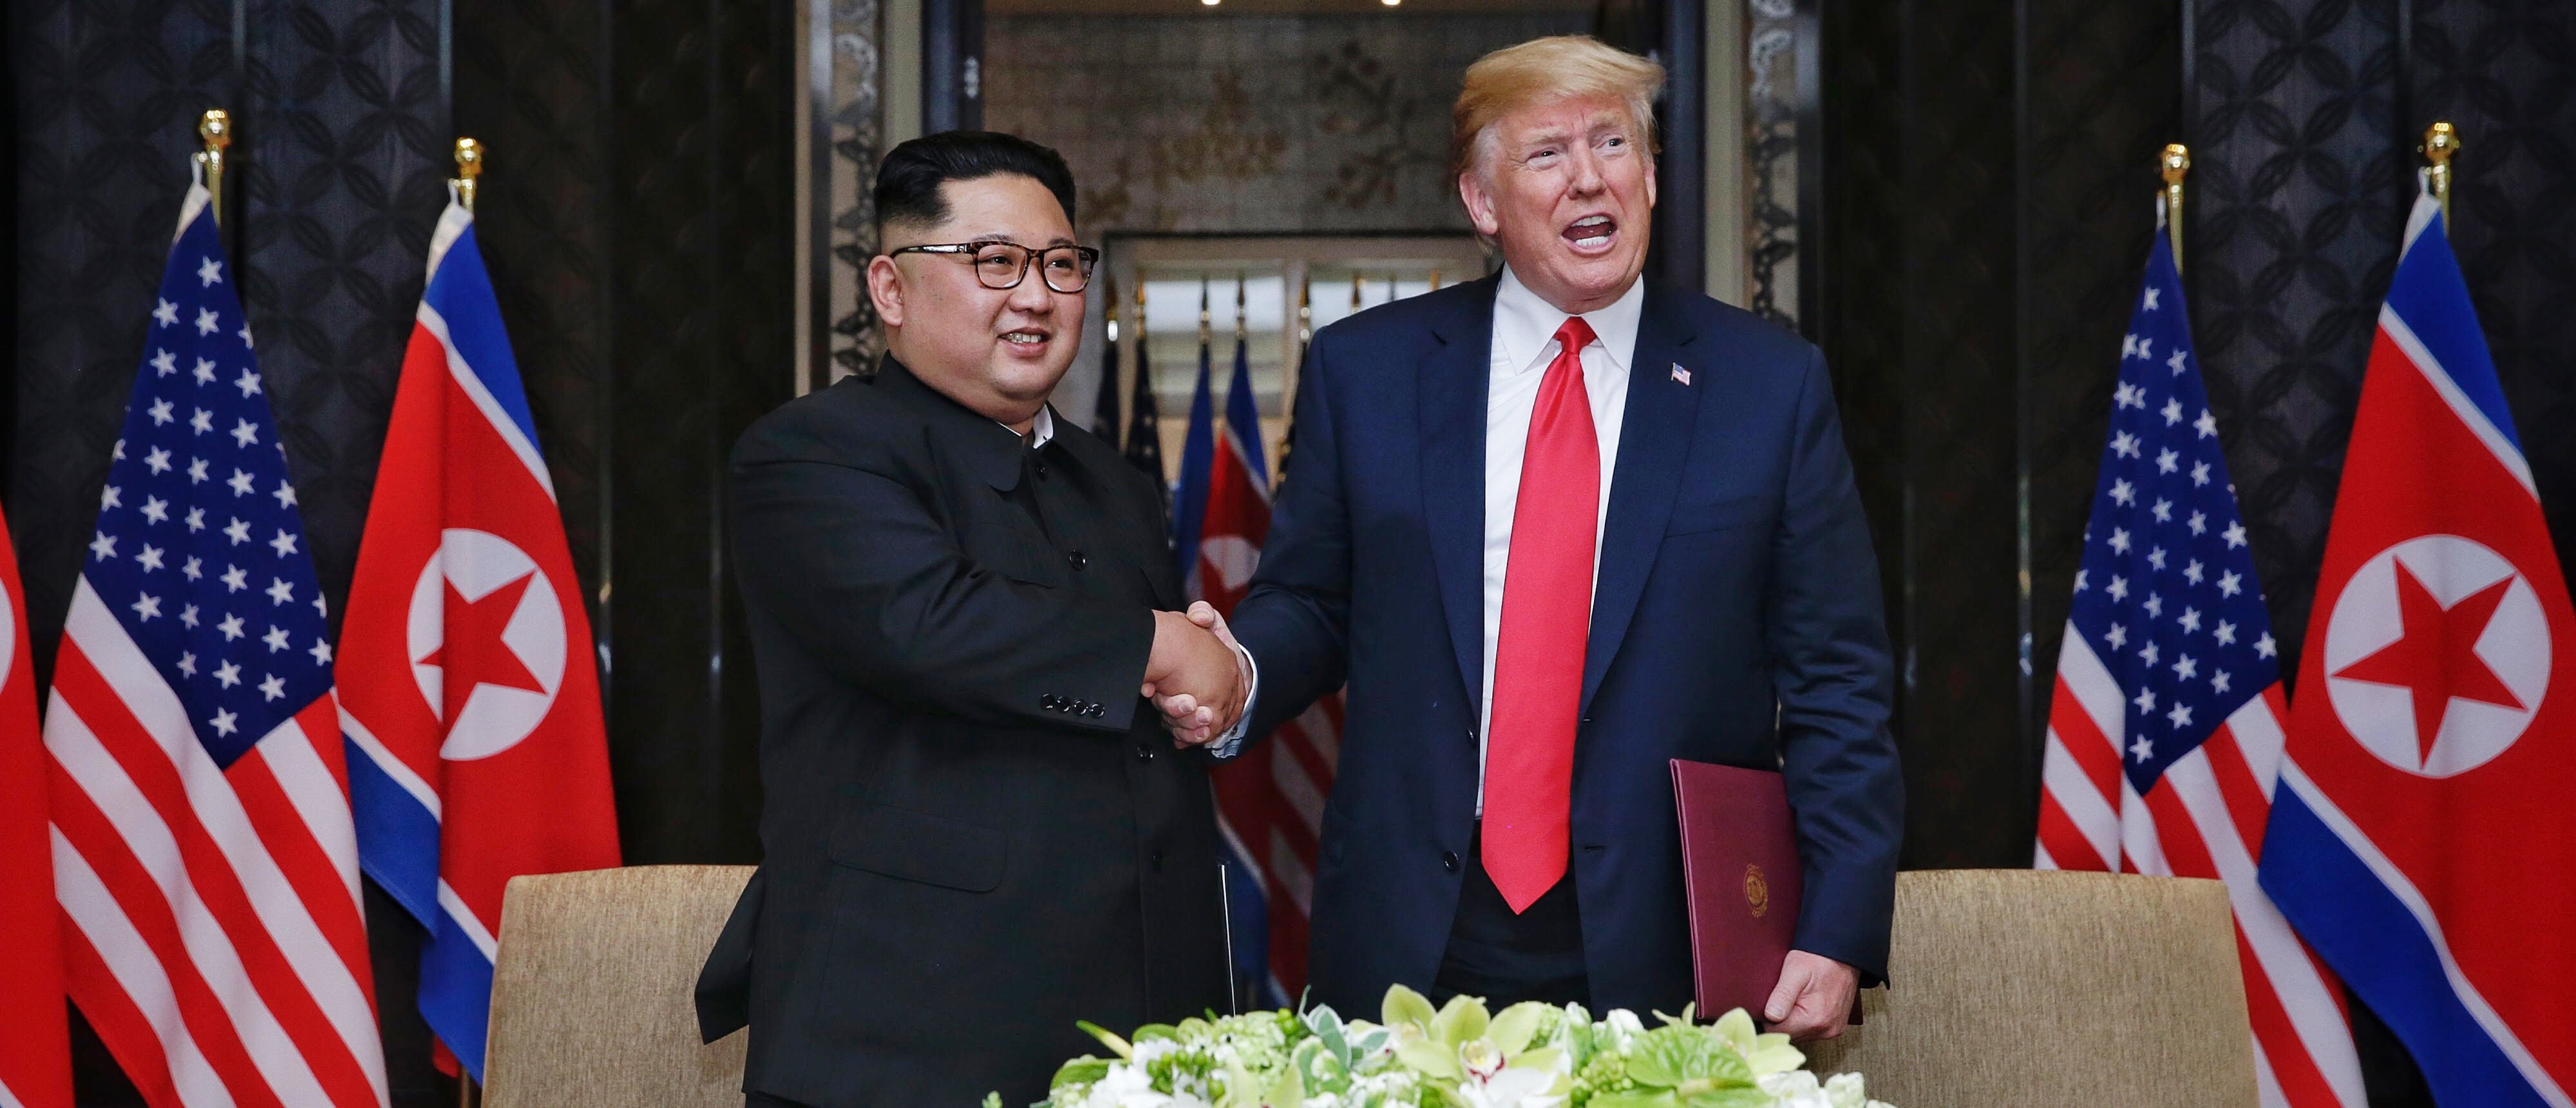 SINGAPORE, SINGAPORE - JUNE 12: In this handout photograph provided by The Strait Times, North Korean leader Kim Jong-un (L) with U.S. President Donald Trump (R) during their historic U.S.-DPRK summit at the Capella Hotel on Sentosa island on June 12, 2018 in Singapore. U.S. President Trump and North Korean leader Kim Jong-un held the historic meeting between leaders of both countries on Tuesday morning in Singapore, carrying hopes to end decades of hostility and the threat of North Korea's nuclear programme. (Photo by Kevin Lim/The Strait Times/Handout/Getty Images)